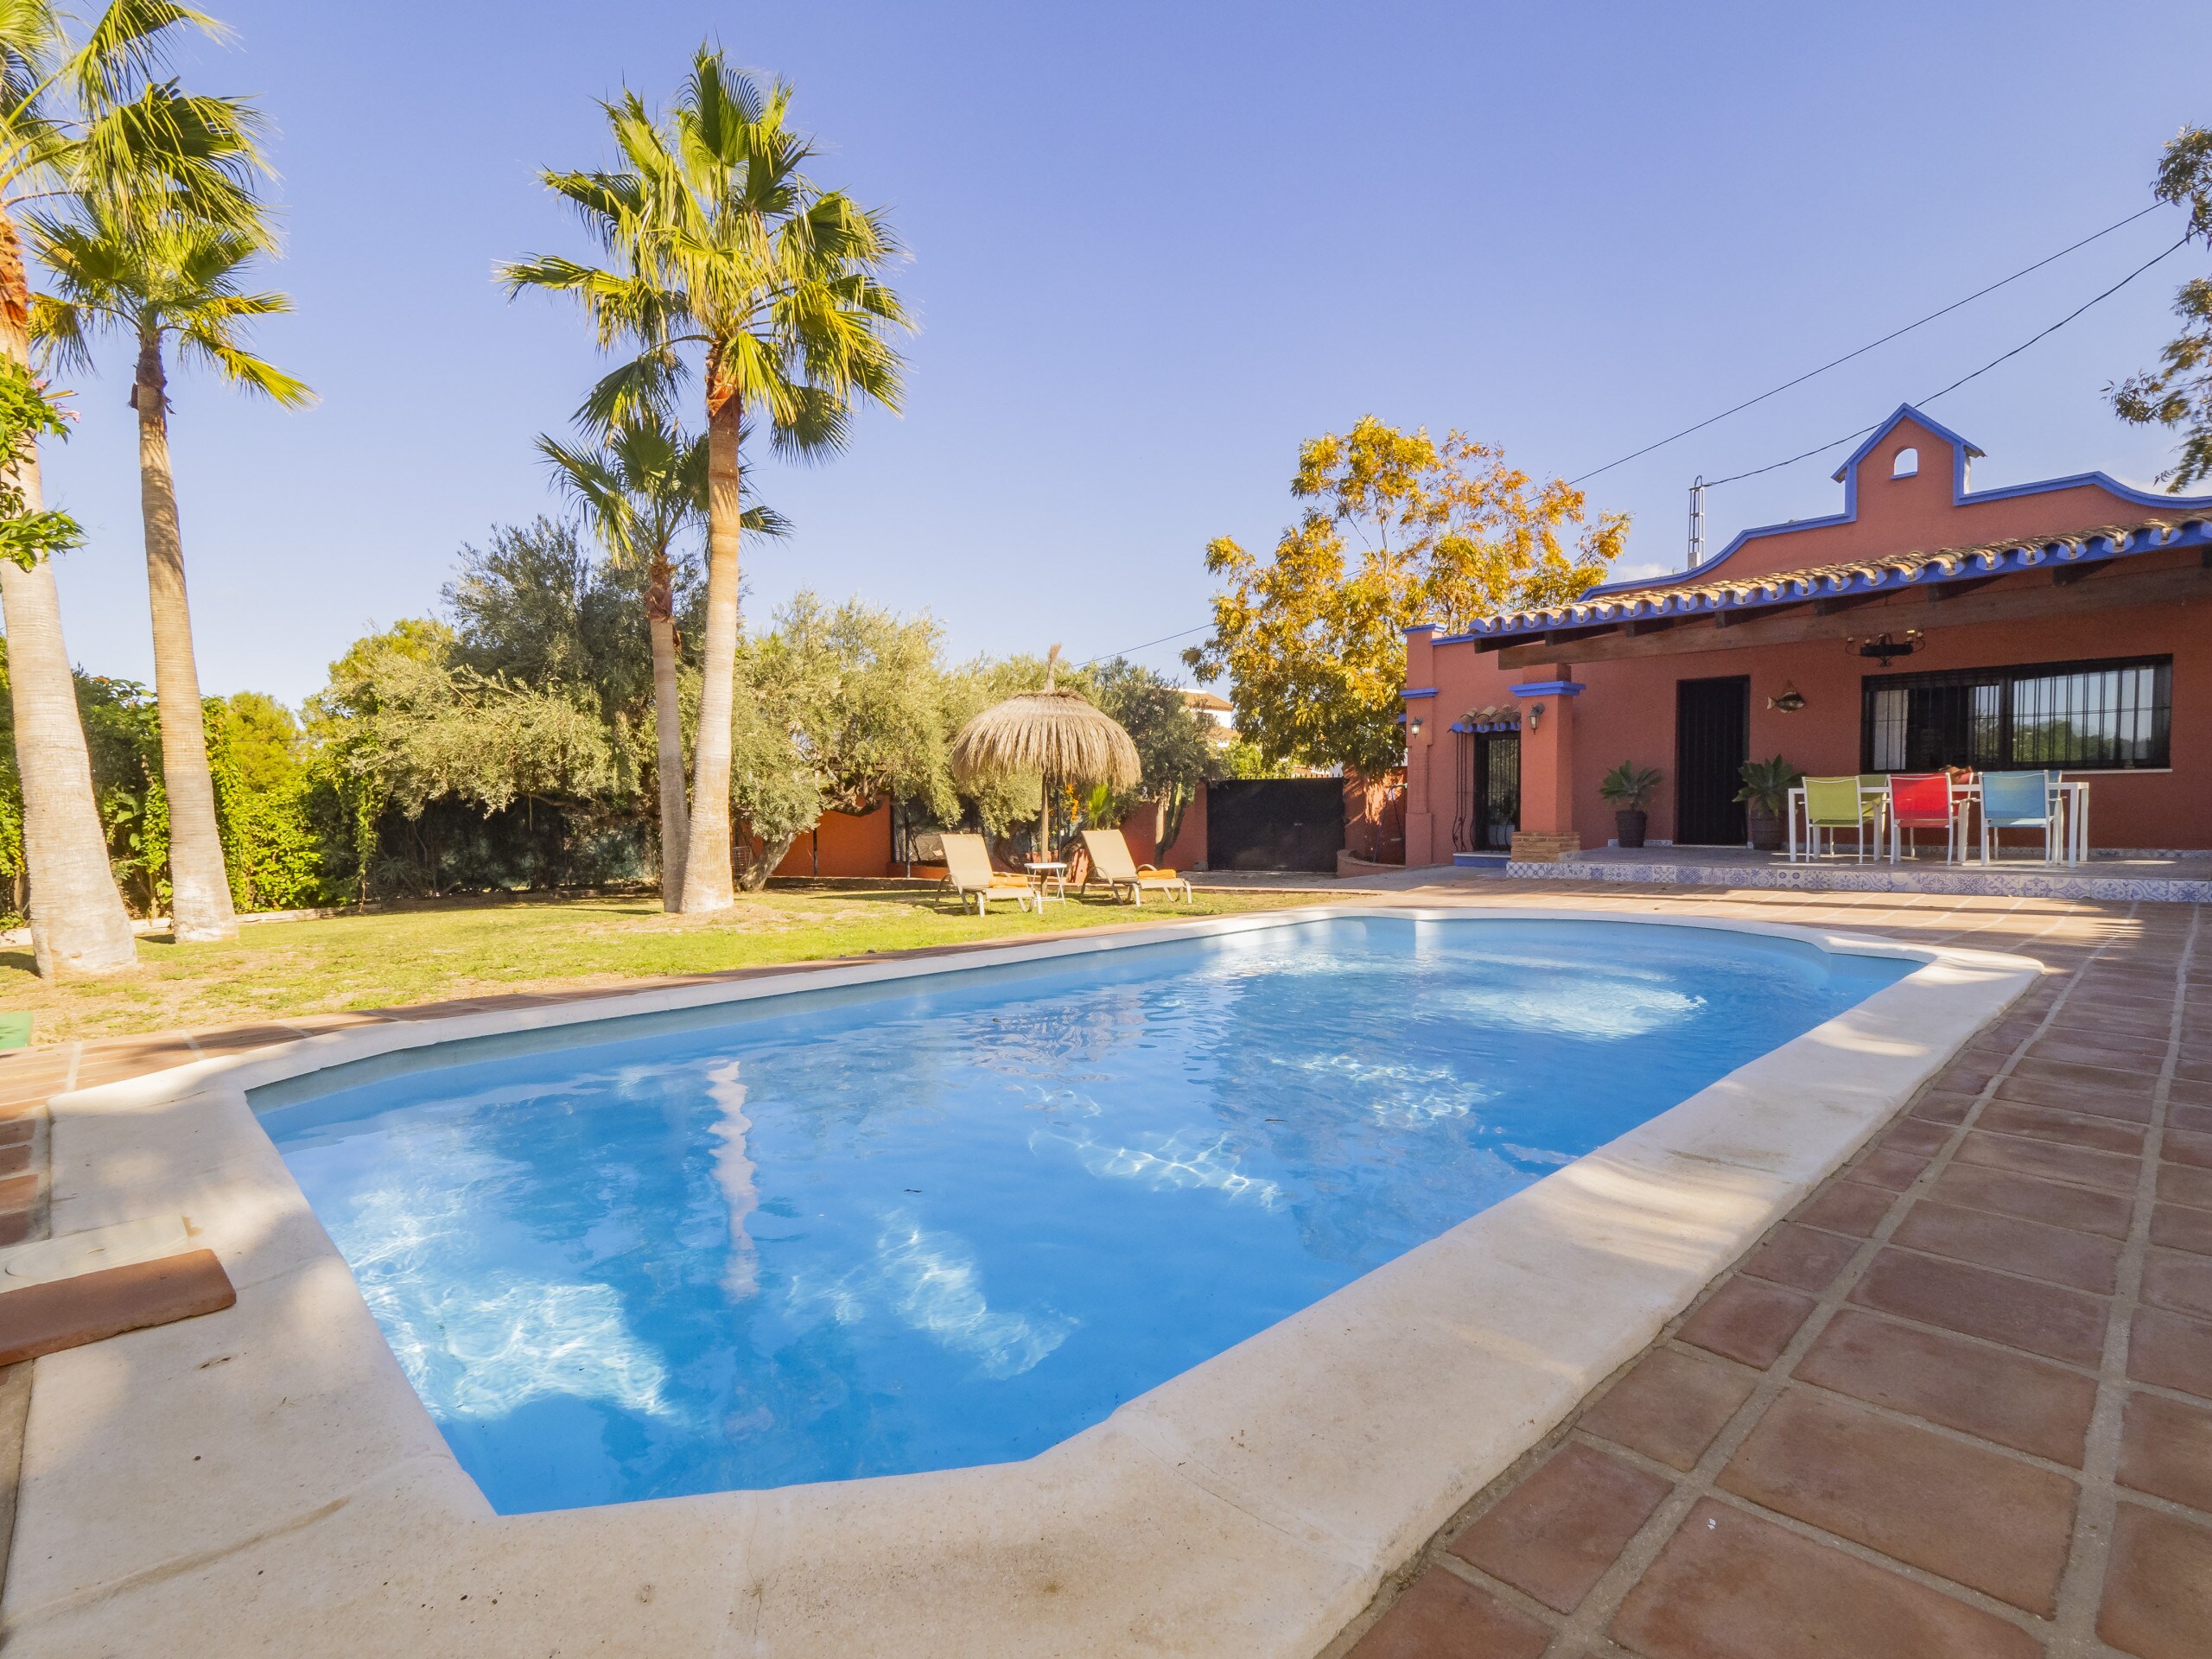 Charming country house with swimming pool for 6 people in Alhaurín